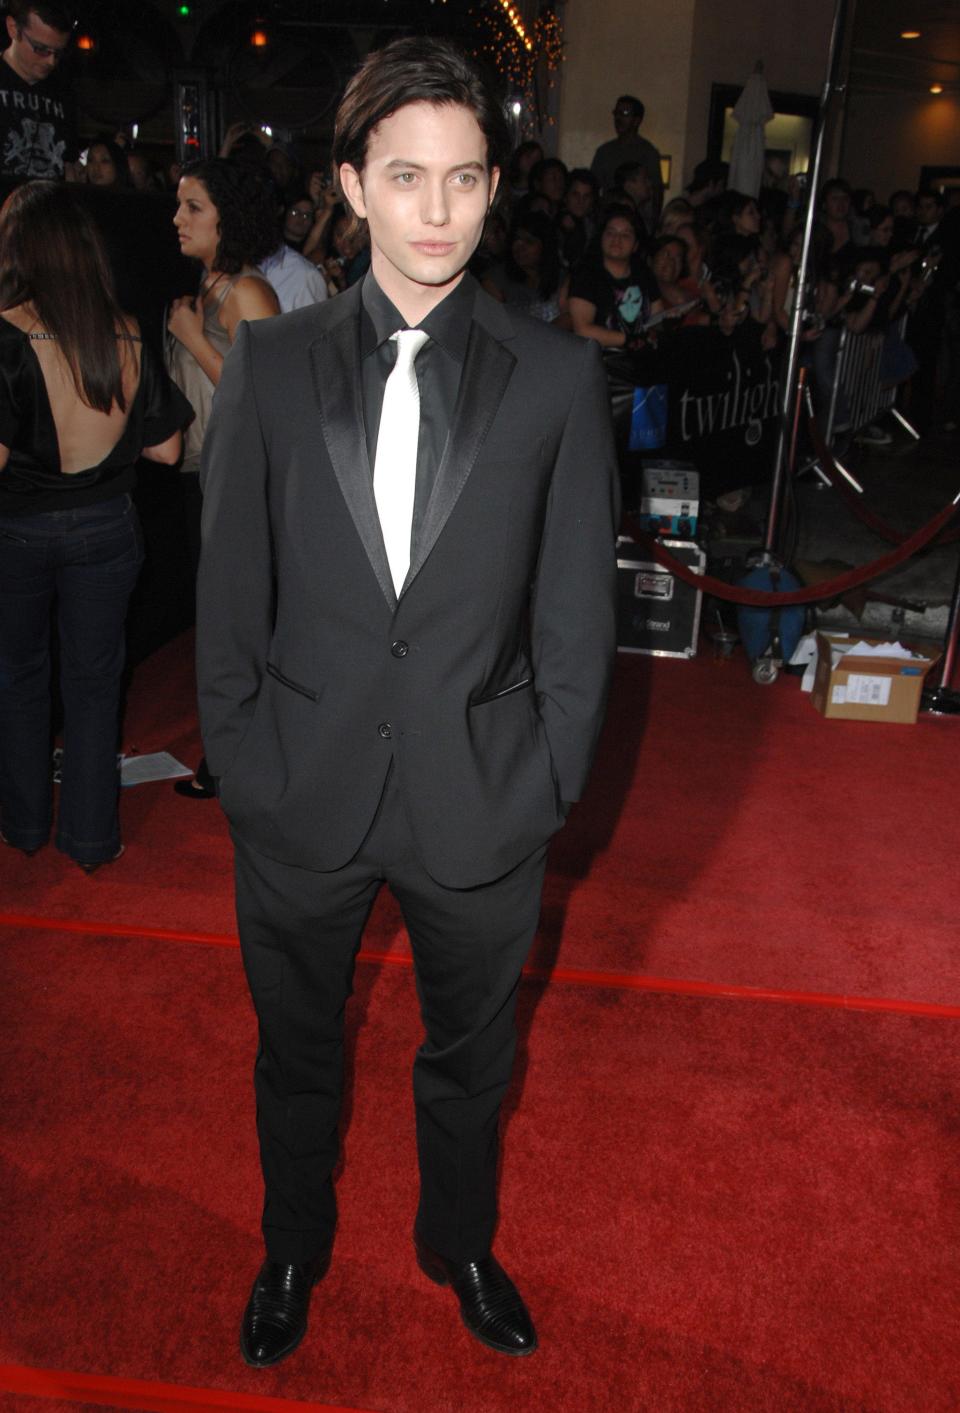 Jackson Rathbone in a black suit and silver tie